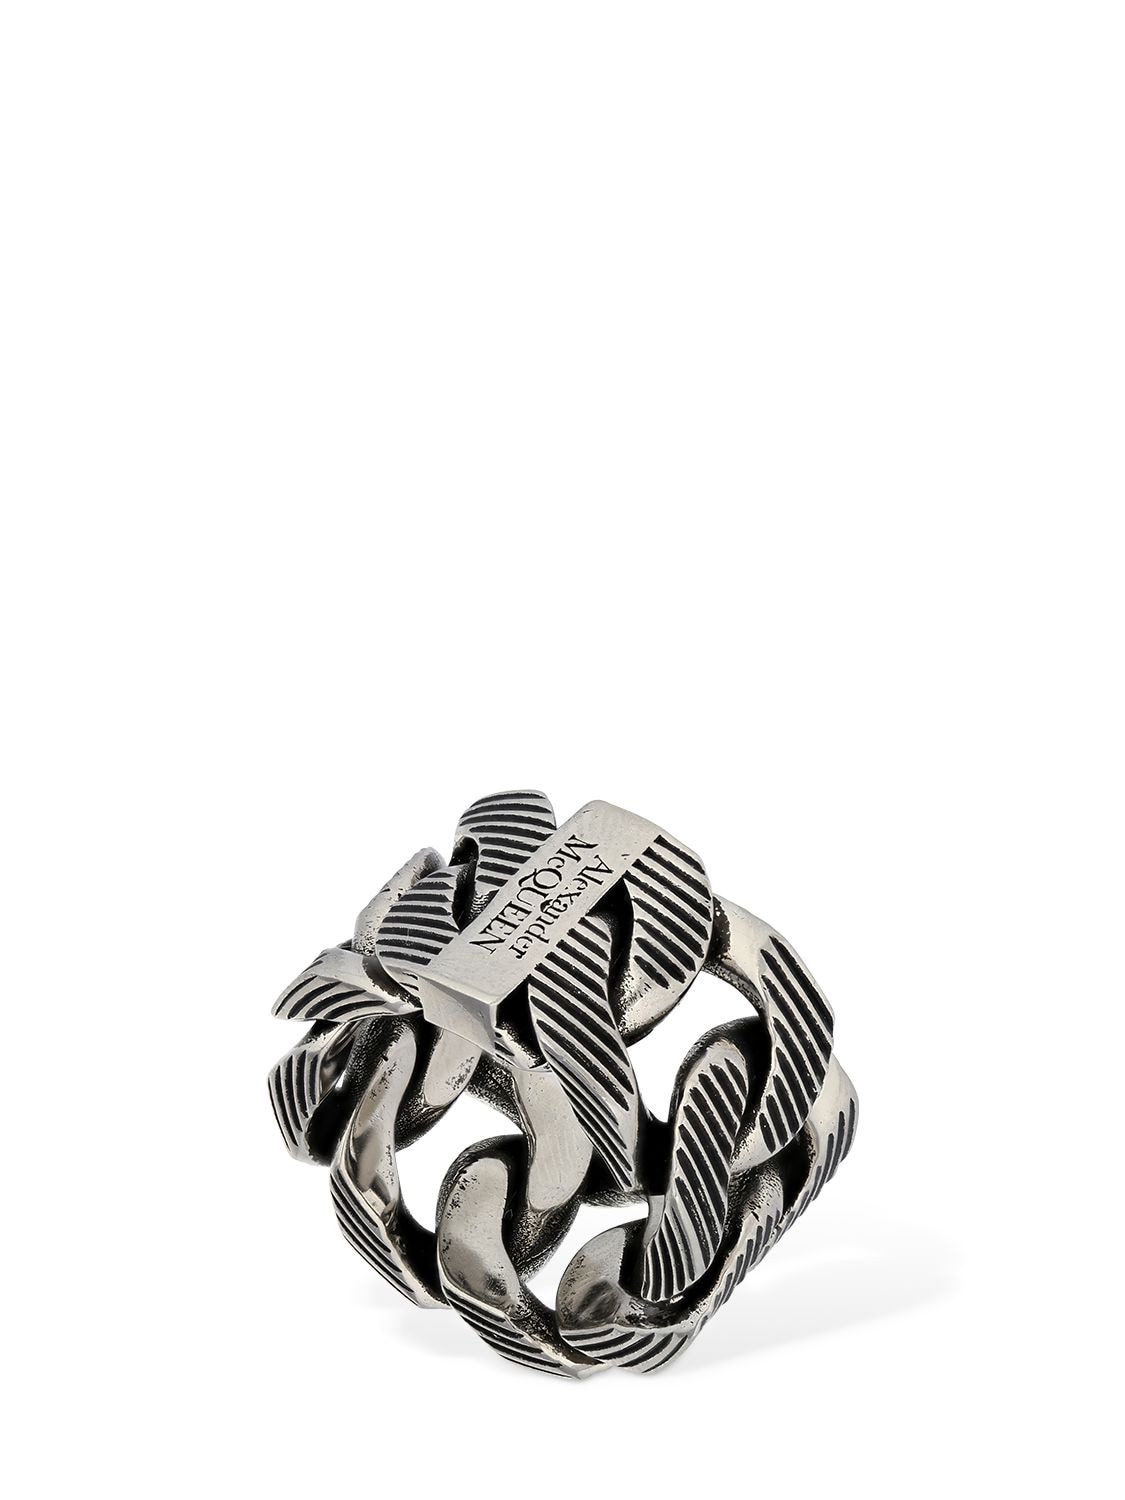 ALEXANDER MCQUEEN TEXTURED CHAIN RING,73IG21003-MDQ0NG2